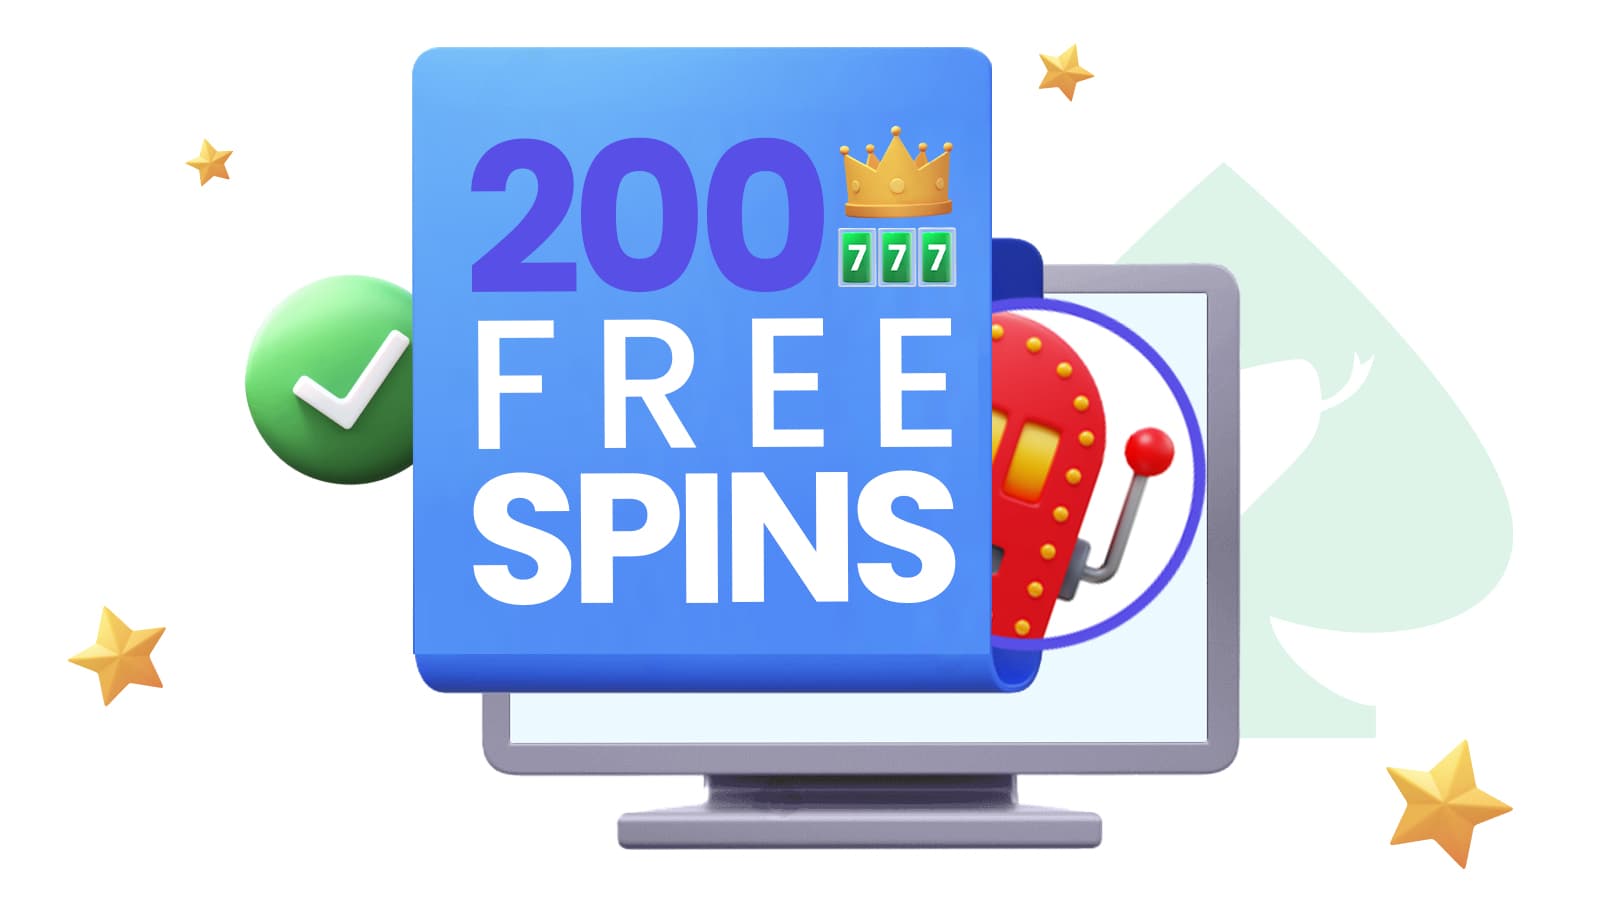 200 free spins terms